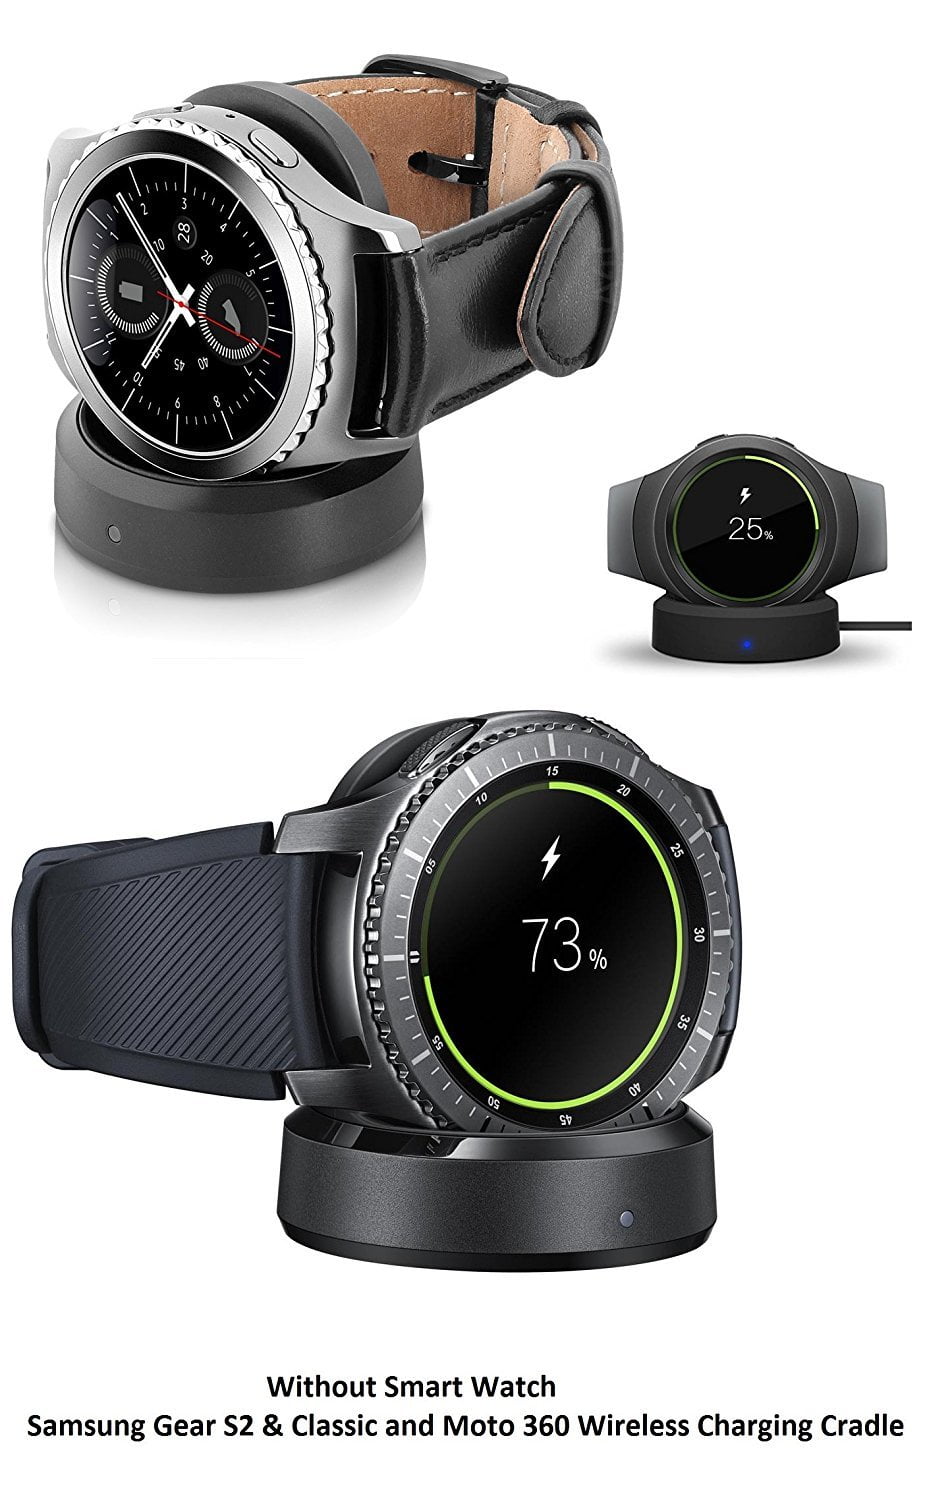 charge gear s2 without cradle